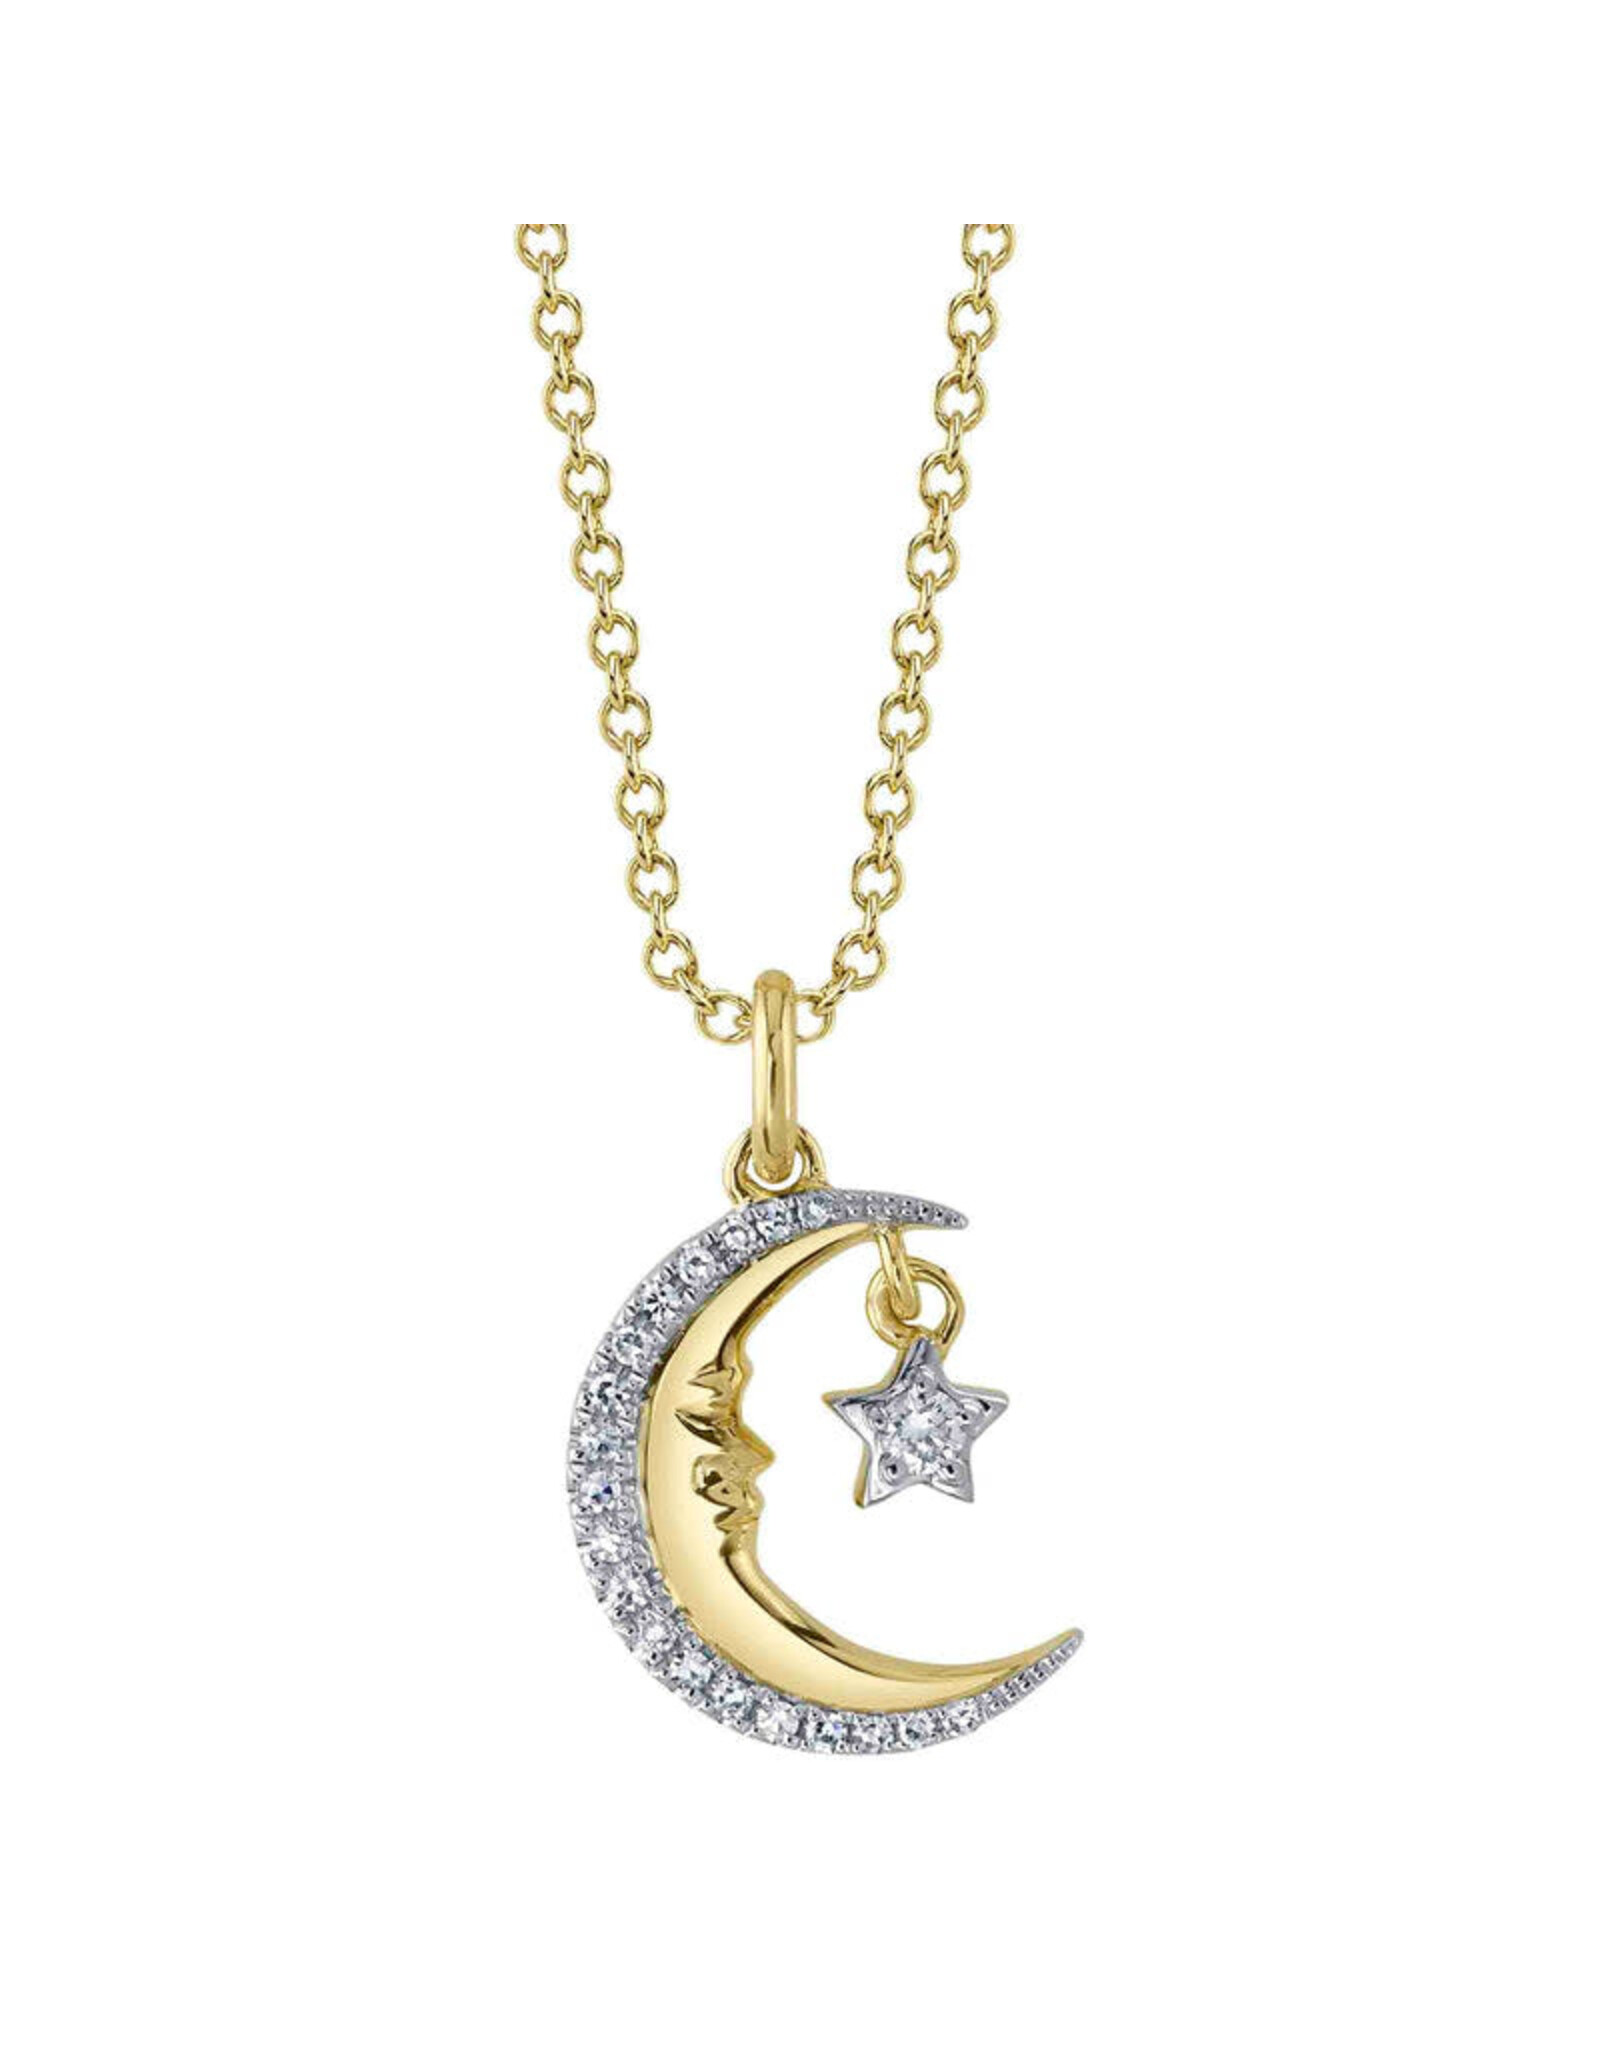 14K Yellow Gold Diamond Crescent Moon & Star Necklace, D: 0.07ct